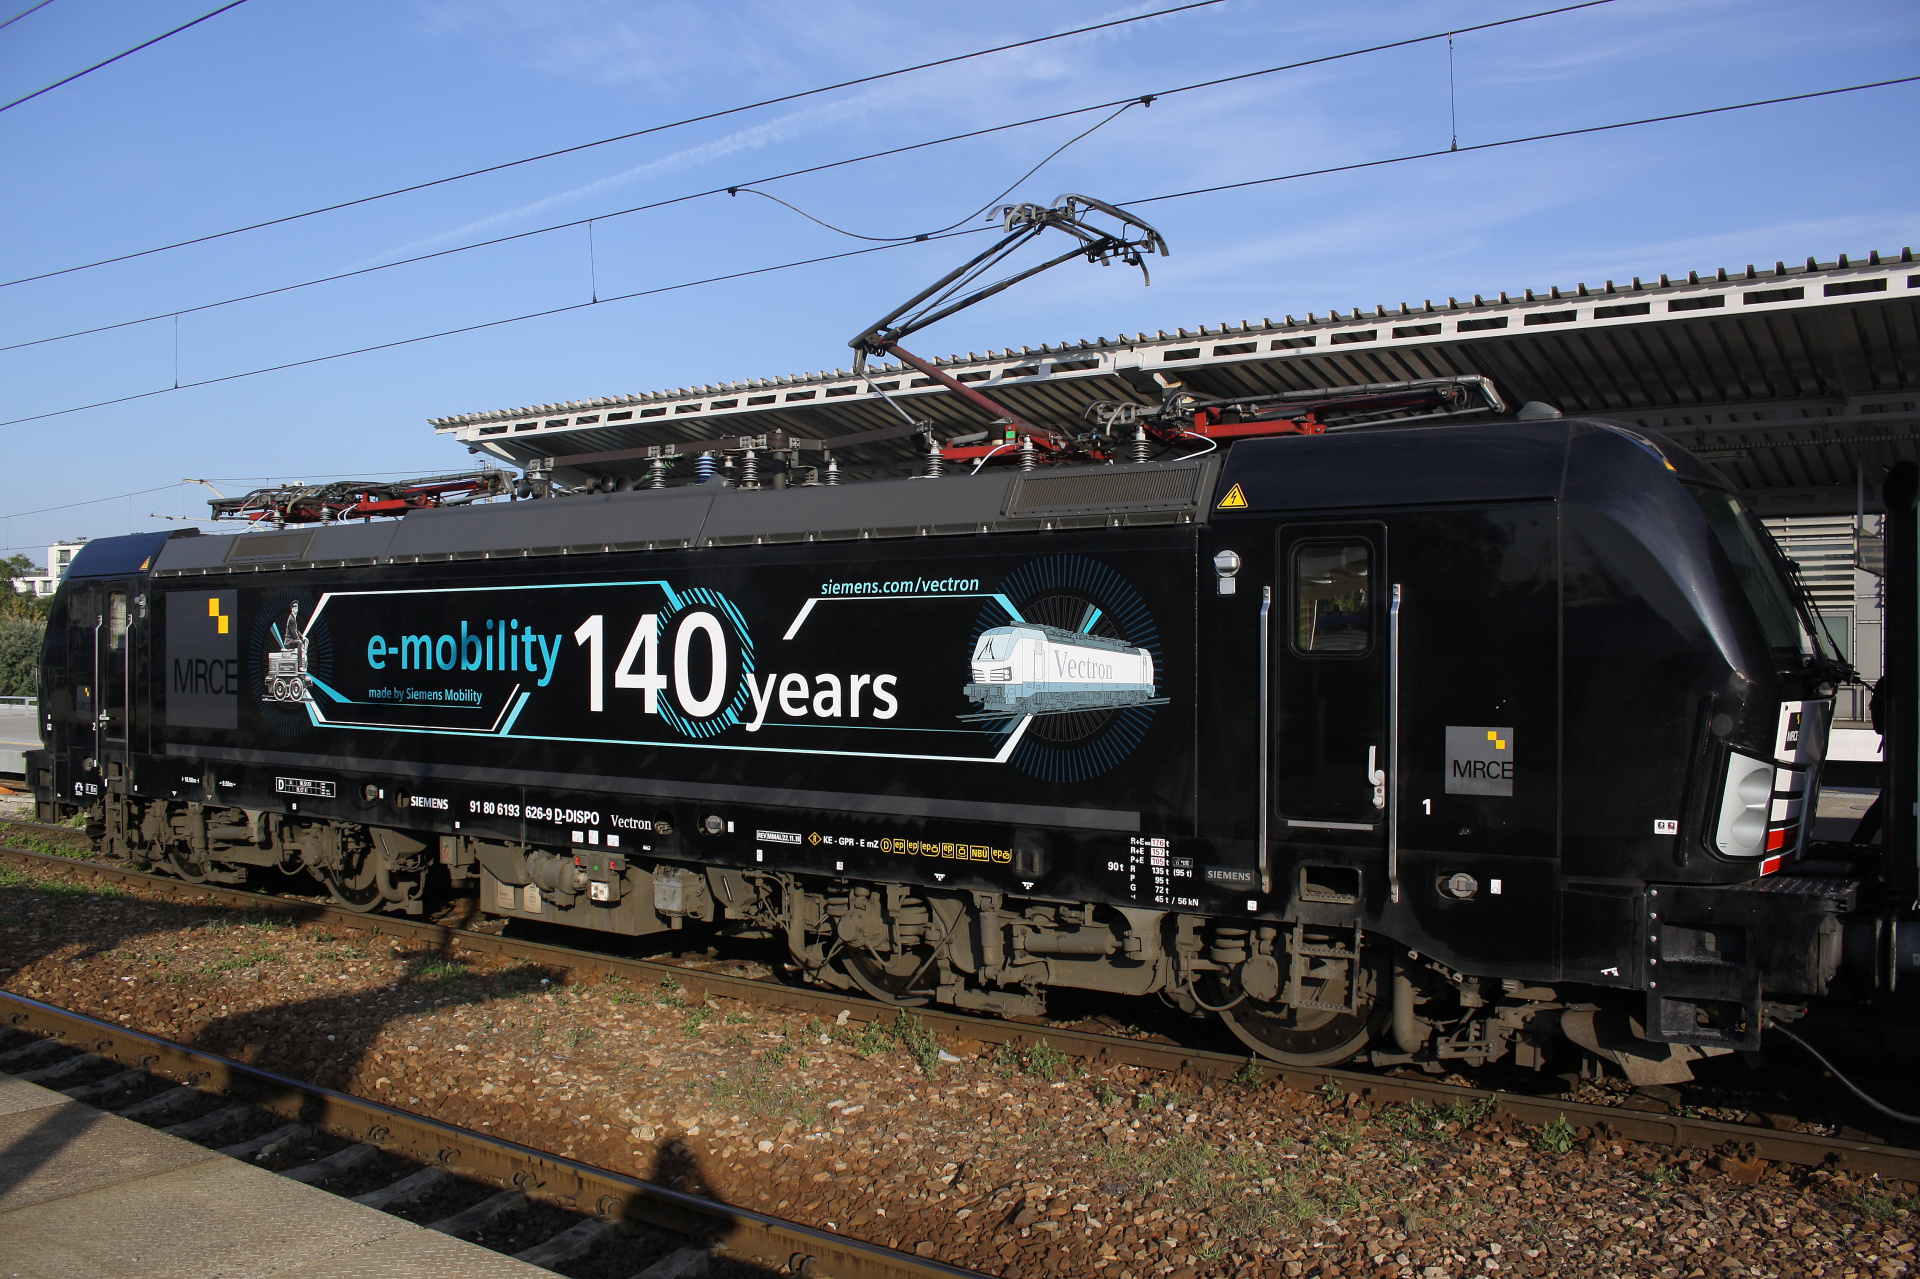 X4-E-Loco-AB Vectron MS X4 E 626 (Siemens e-mobility. 140 years livery) (Vehicles » Trains and Locomotives » Siemens Vectron)